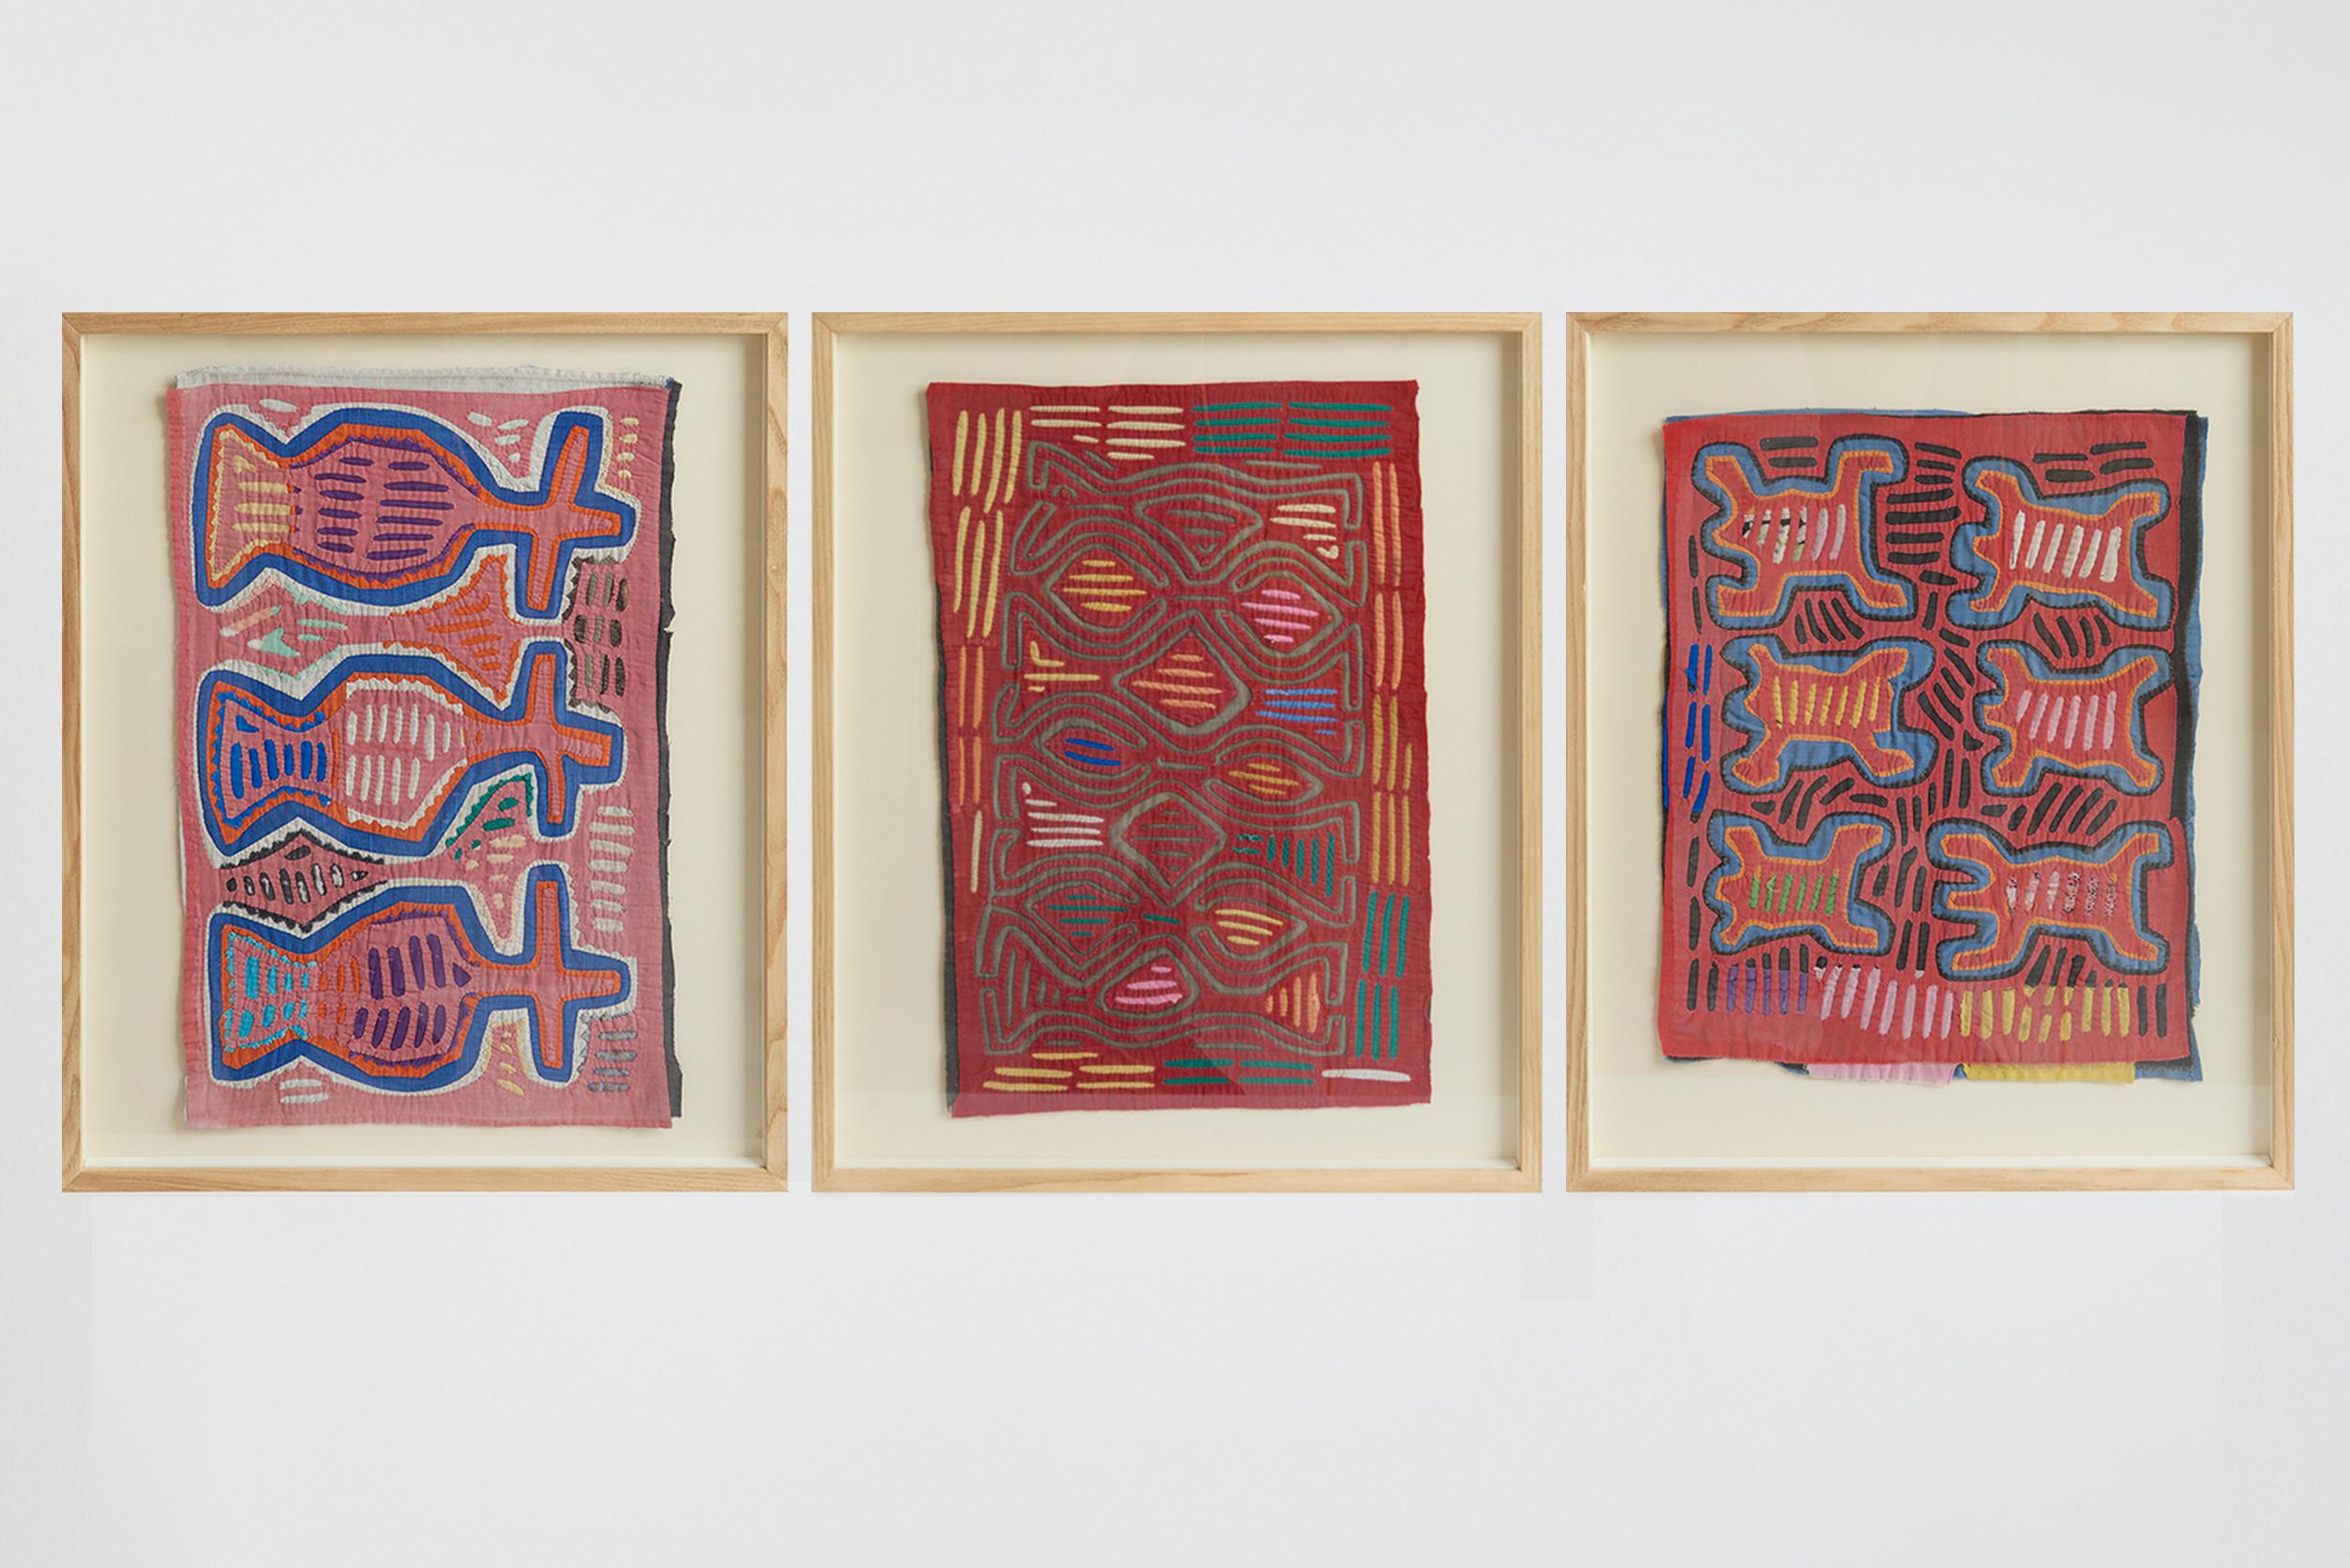 A set of framed Mola textiles.
Traditional clothing of the indigenous Guna people from Panamá and Colombia.
South America, 1960s.
Each: 62.5 cm high by 50.5 cm wide by 2.5 cm depth